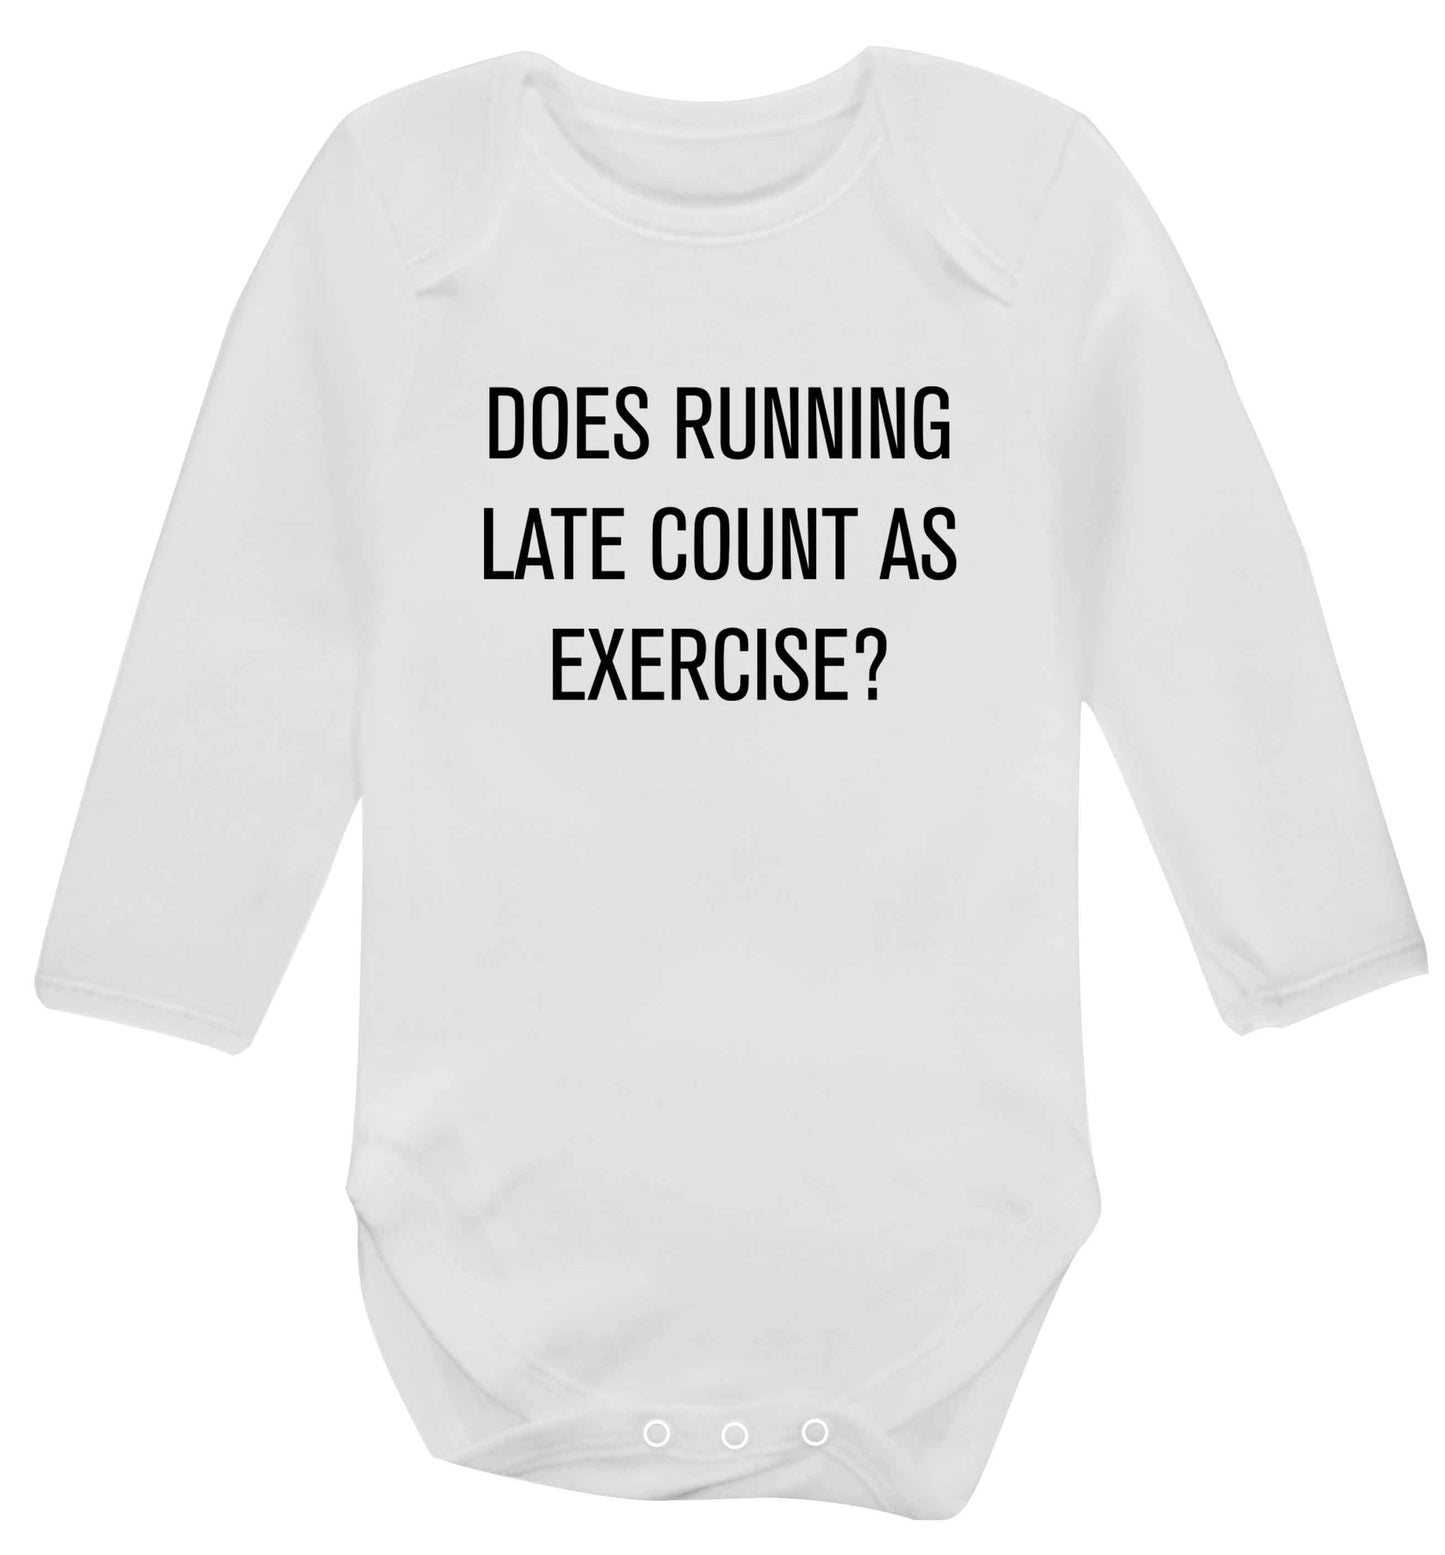 Does running late count as exercise? baby vest long sleeved white 6-12 months